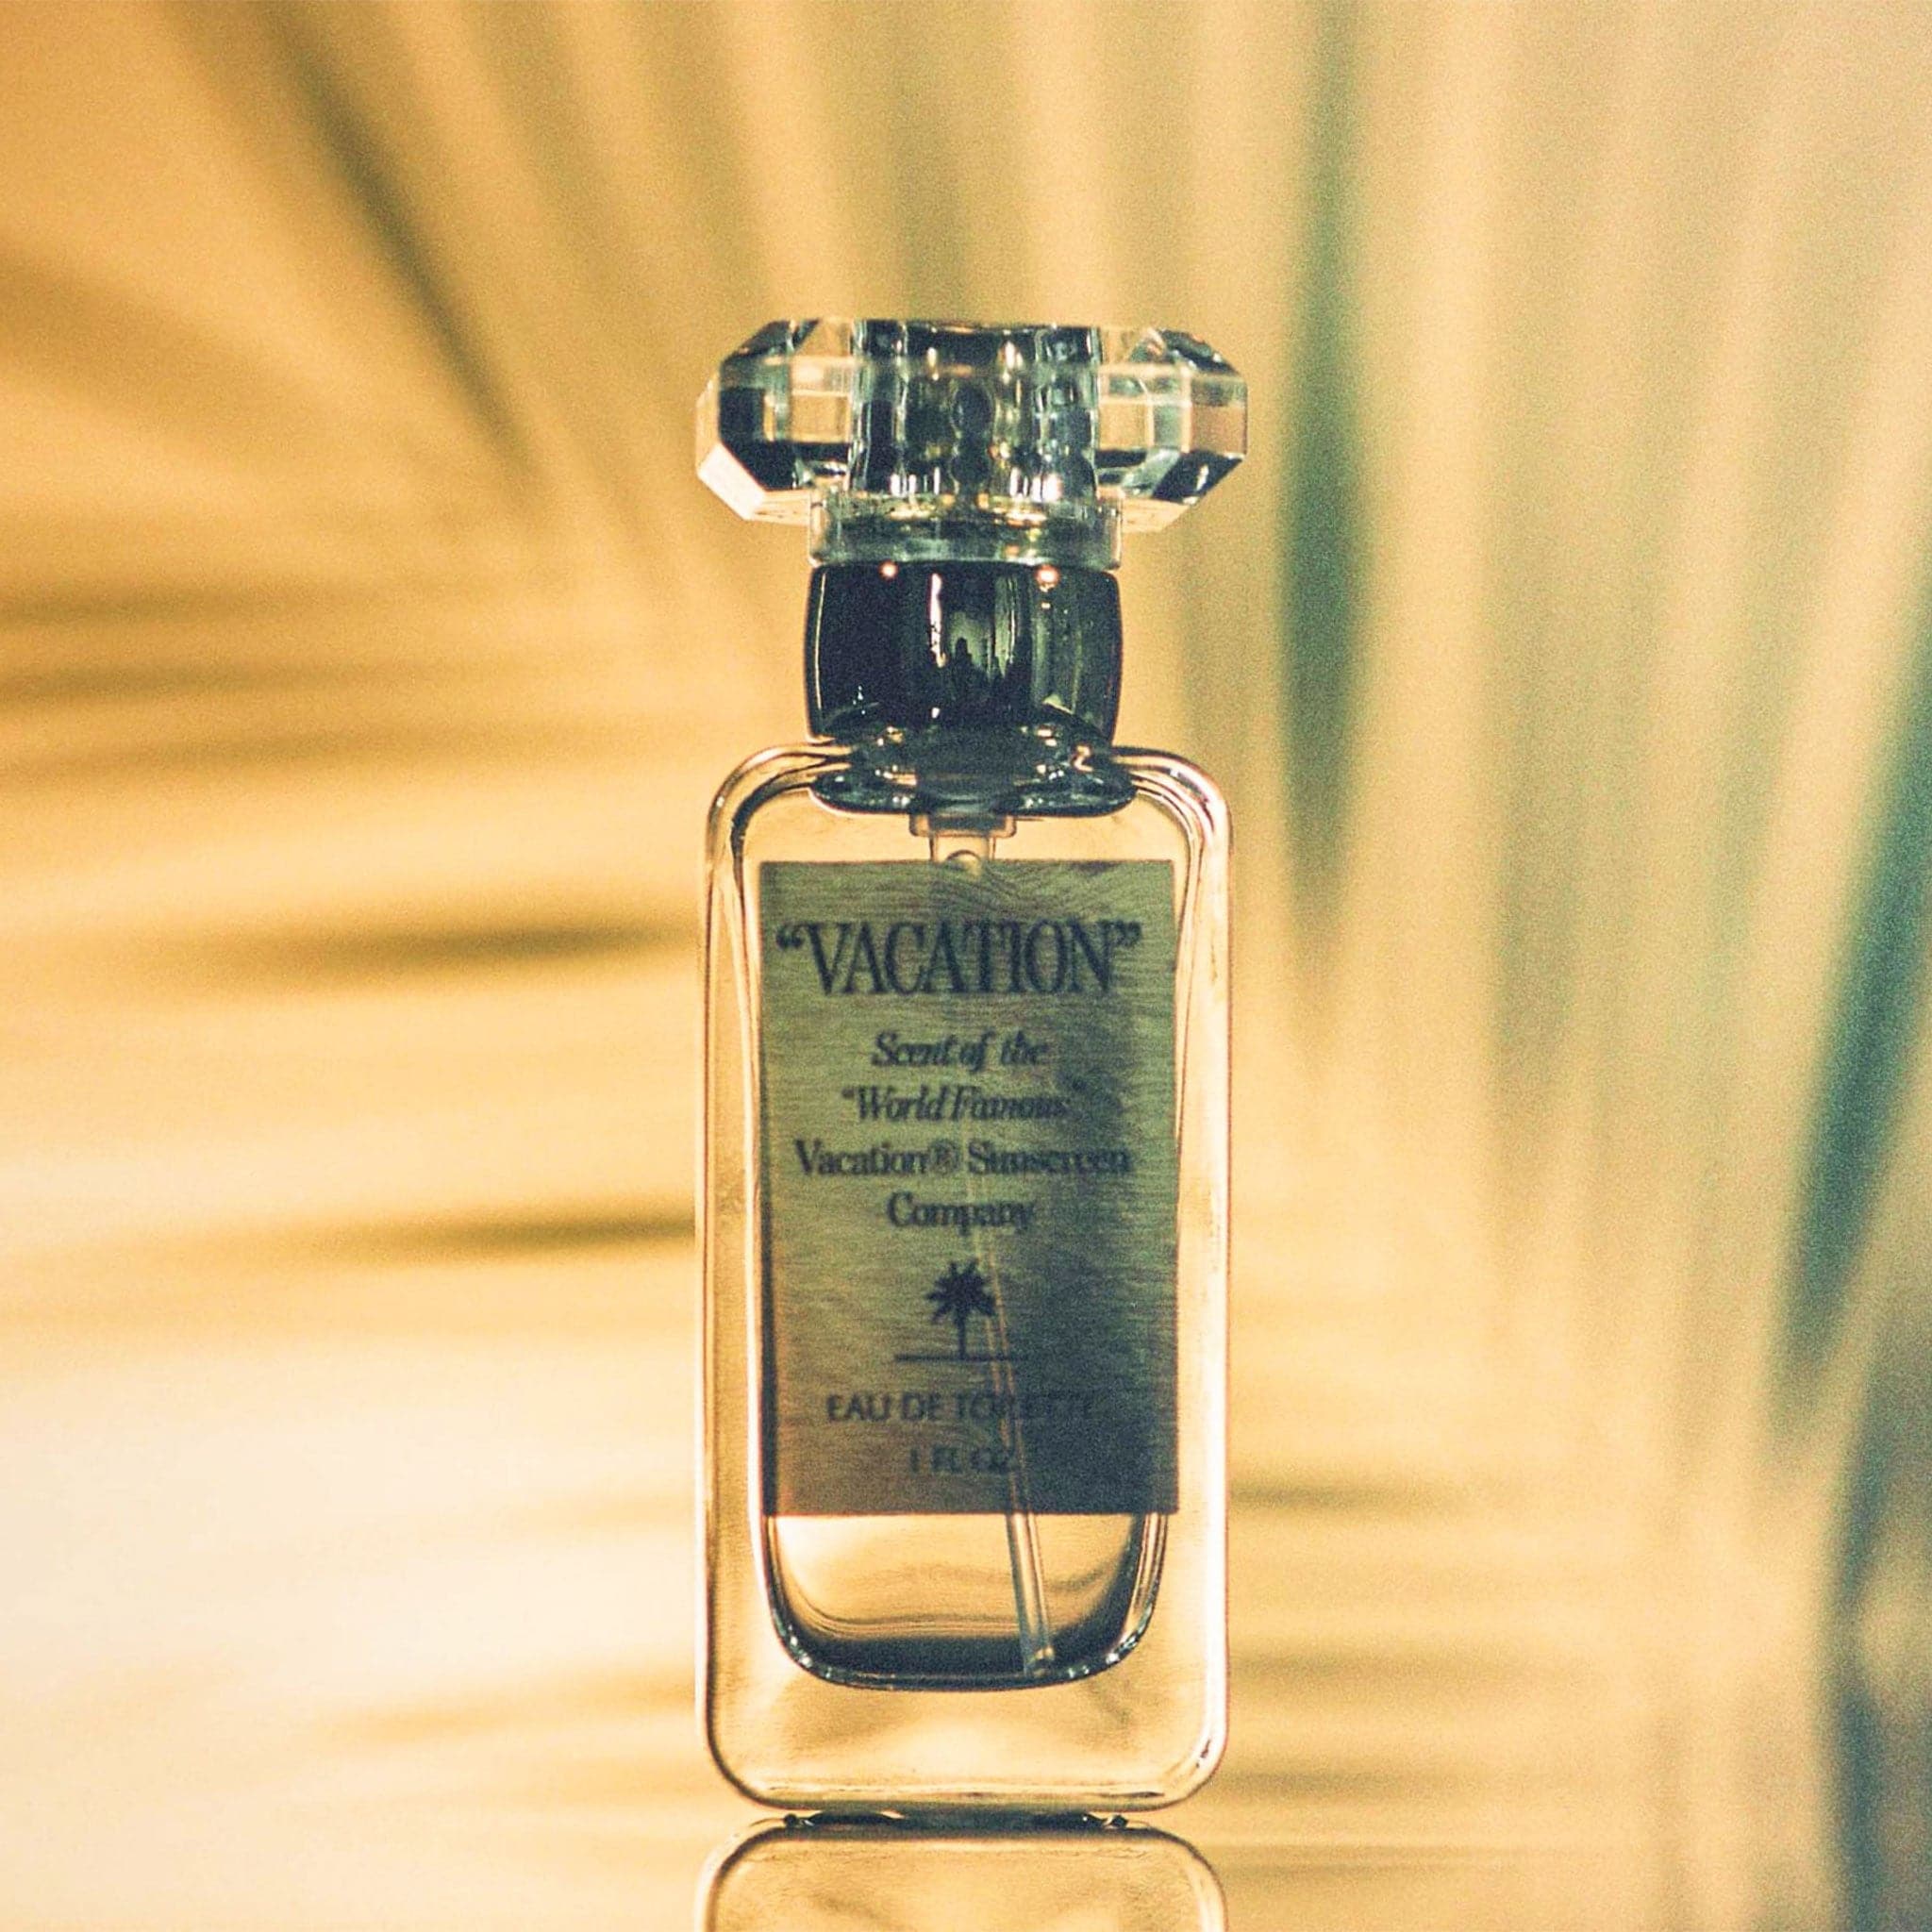 Glass perfume bottle that reads 'Vacation, Scent of World Famous Vacation Sunscreen Company' across the front label. The bottle is topped with a glass knob lid. The bottle is placed against a shadow palm background. 